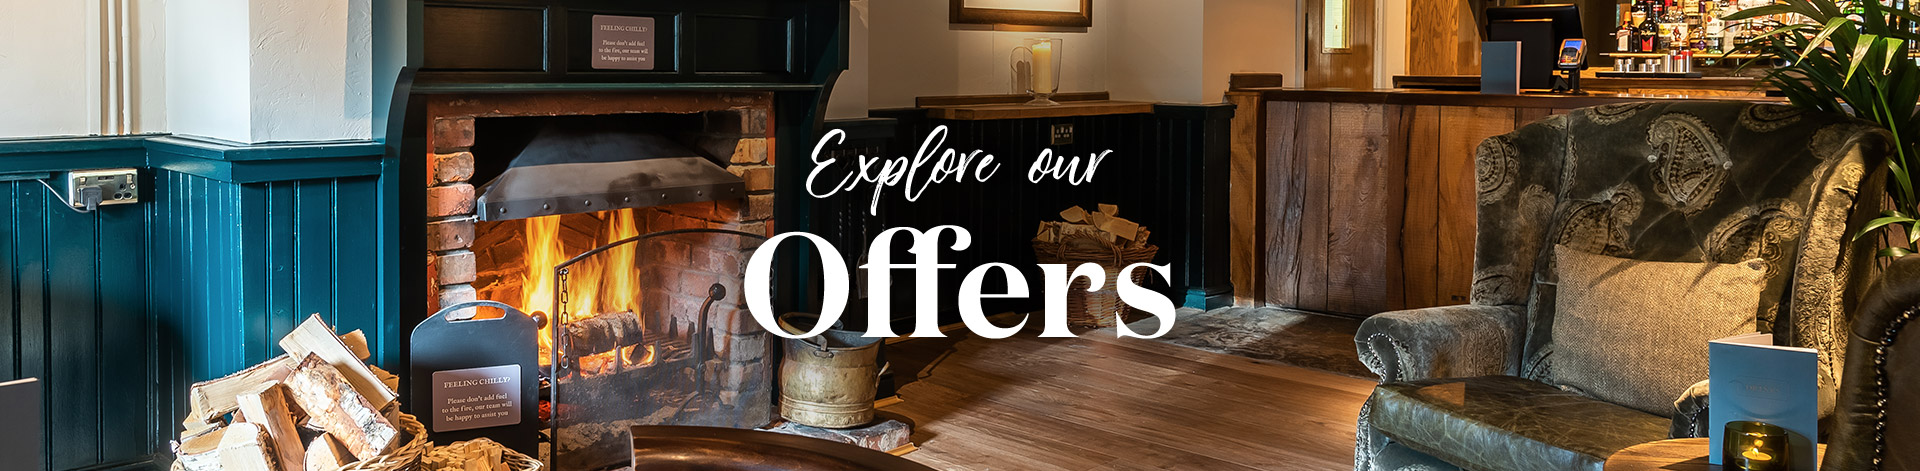 Our latest offers at Heanton Court